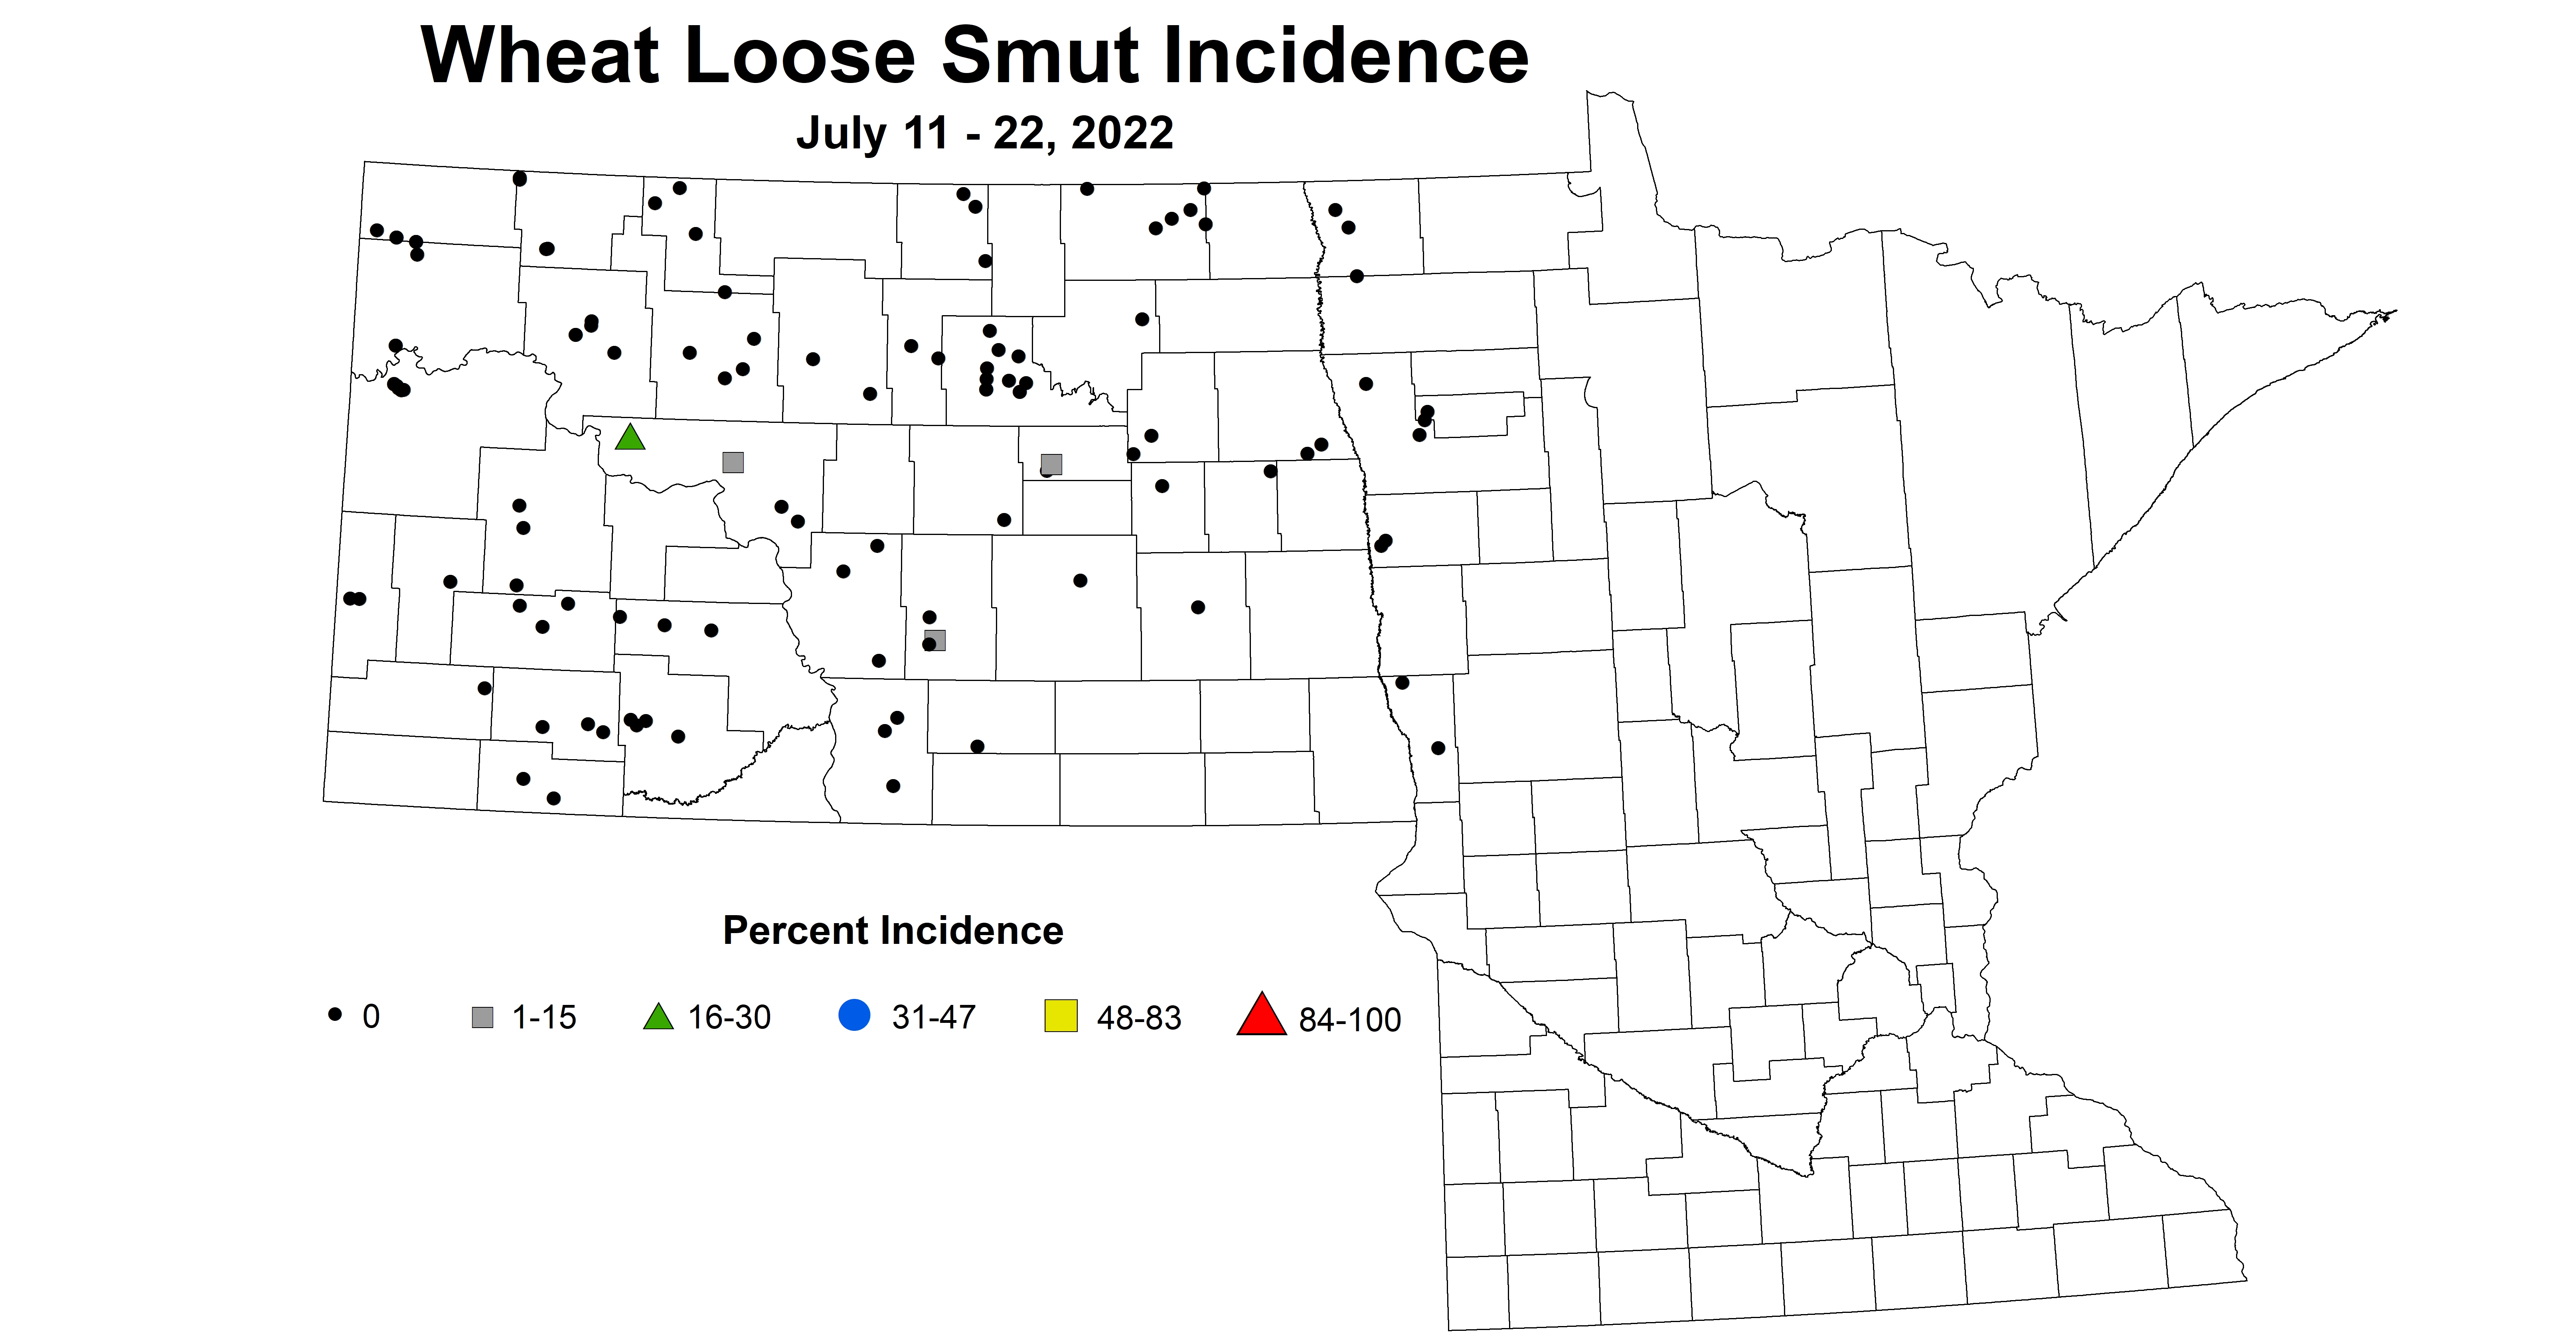 wheat loose smut incidence 2022 7.11-7.22